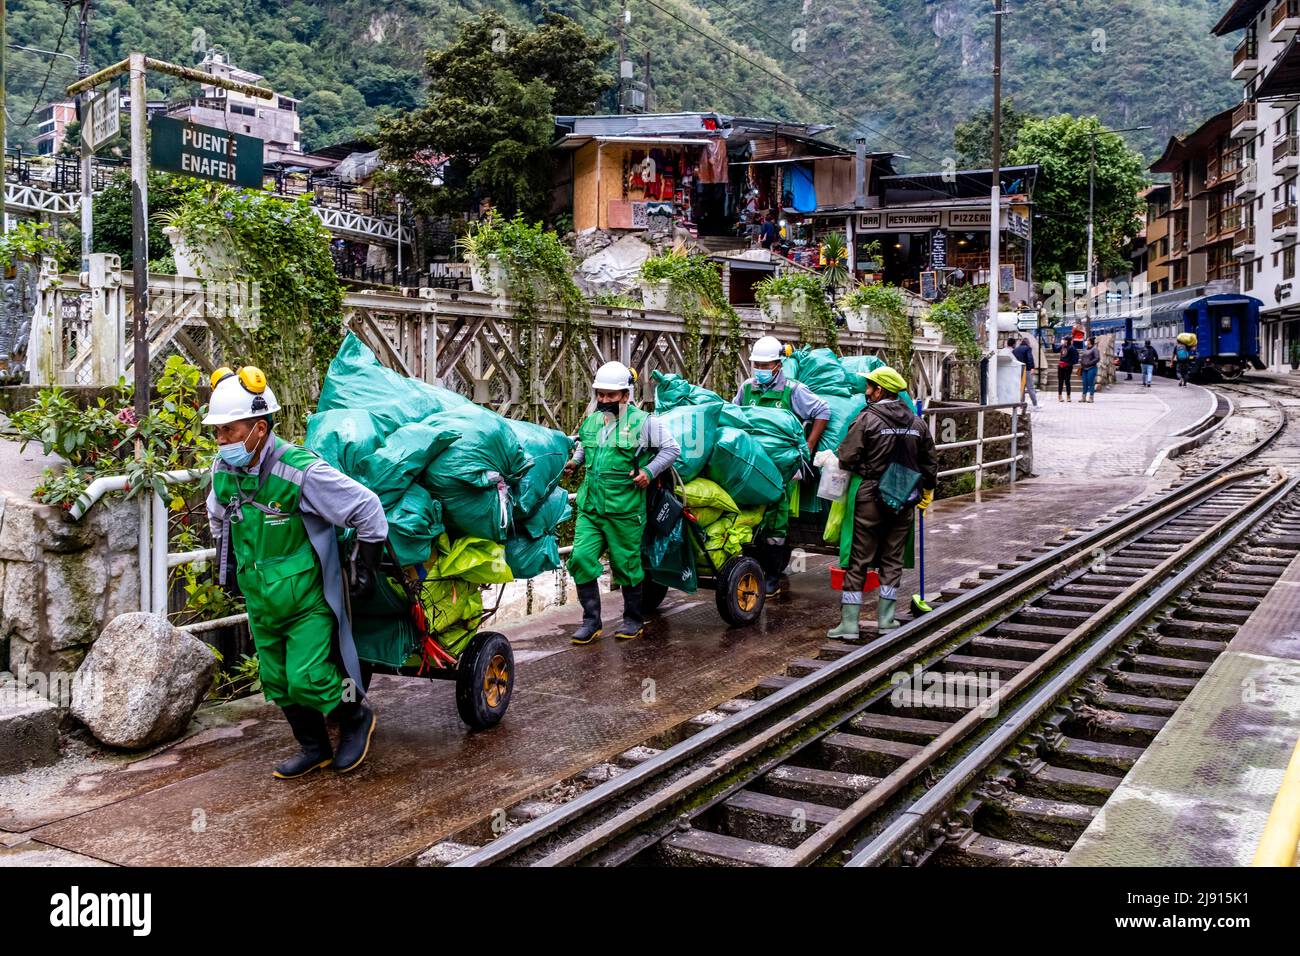 Peruvian Environmental Workers Transporting Goods From The Train Station In Aguas Calientes, Cusco Region, Peru. Stock Photo